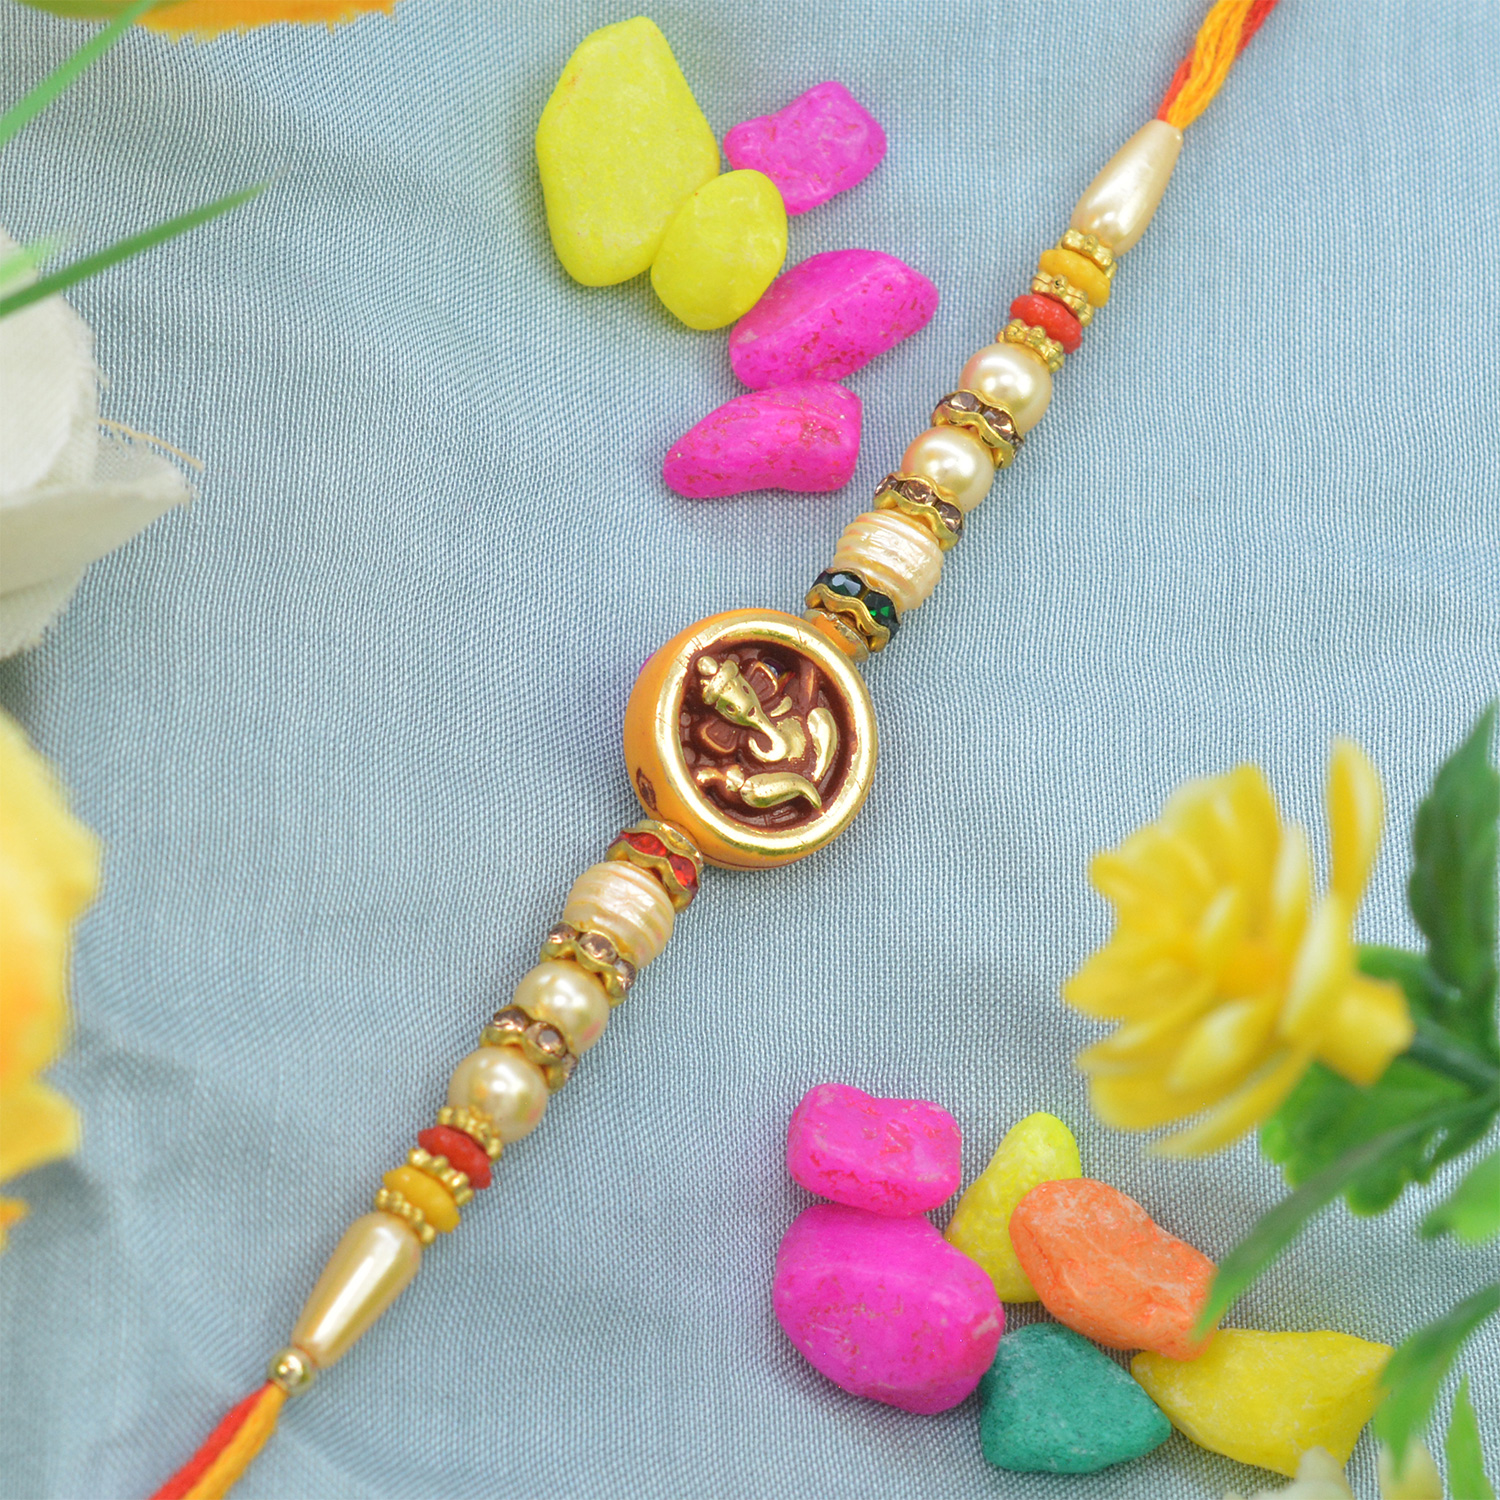 Amazing Golden Ganesh with Beautiful Multicolor Pearls in Colorful Thread